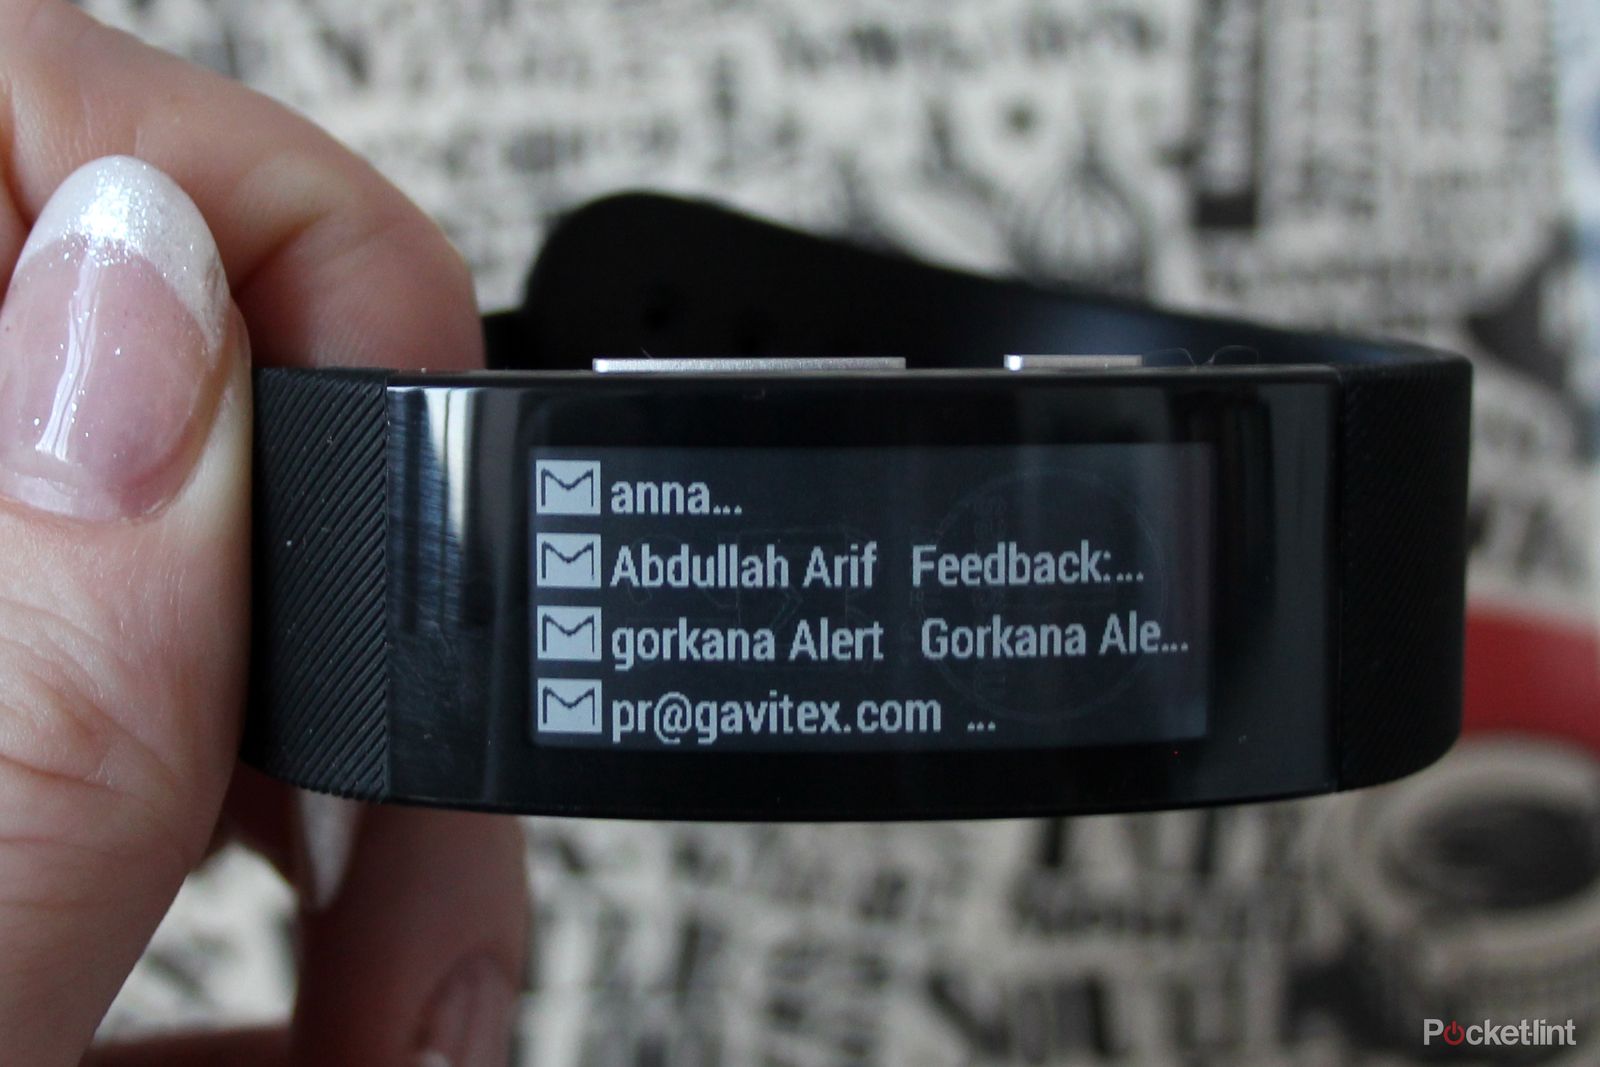 sony smartband talk review image 26